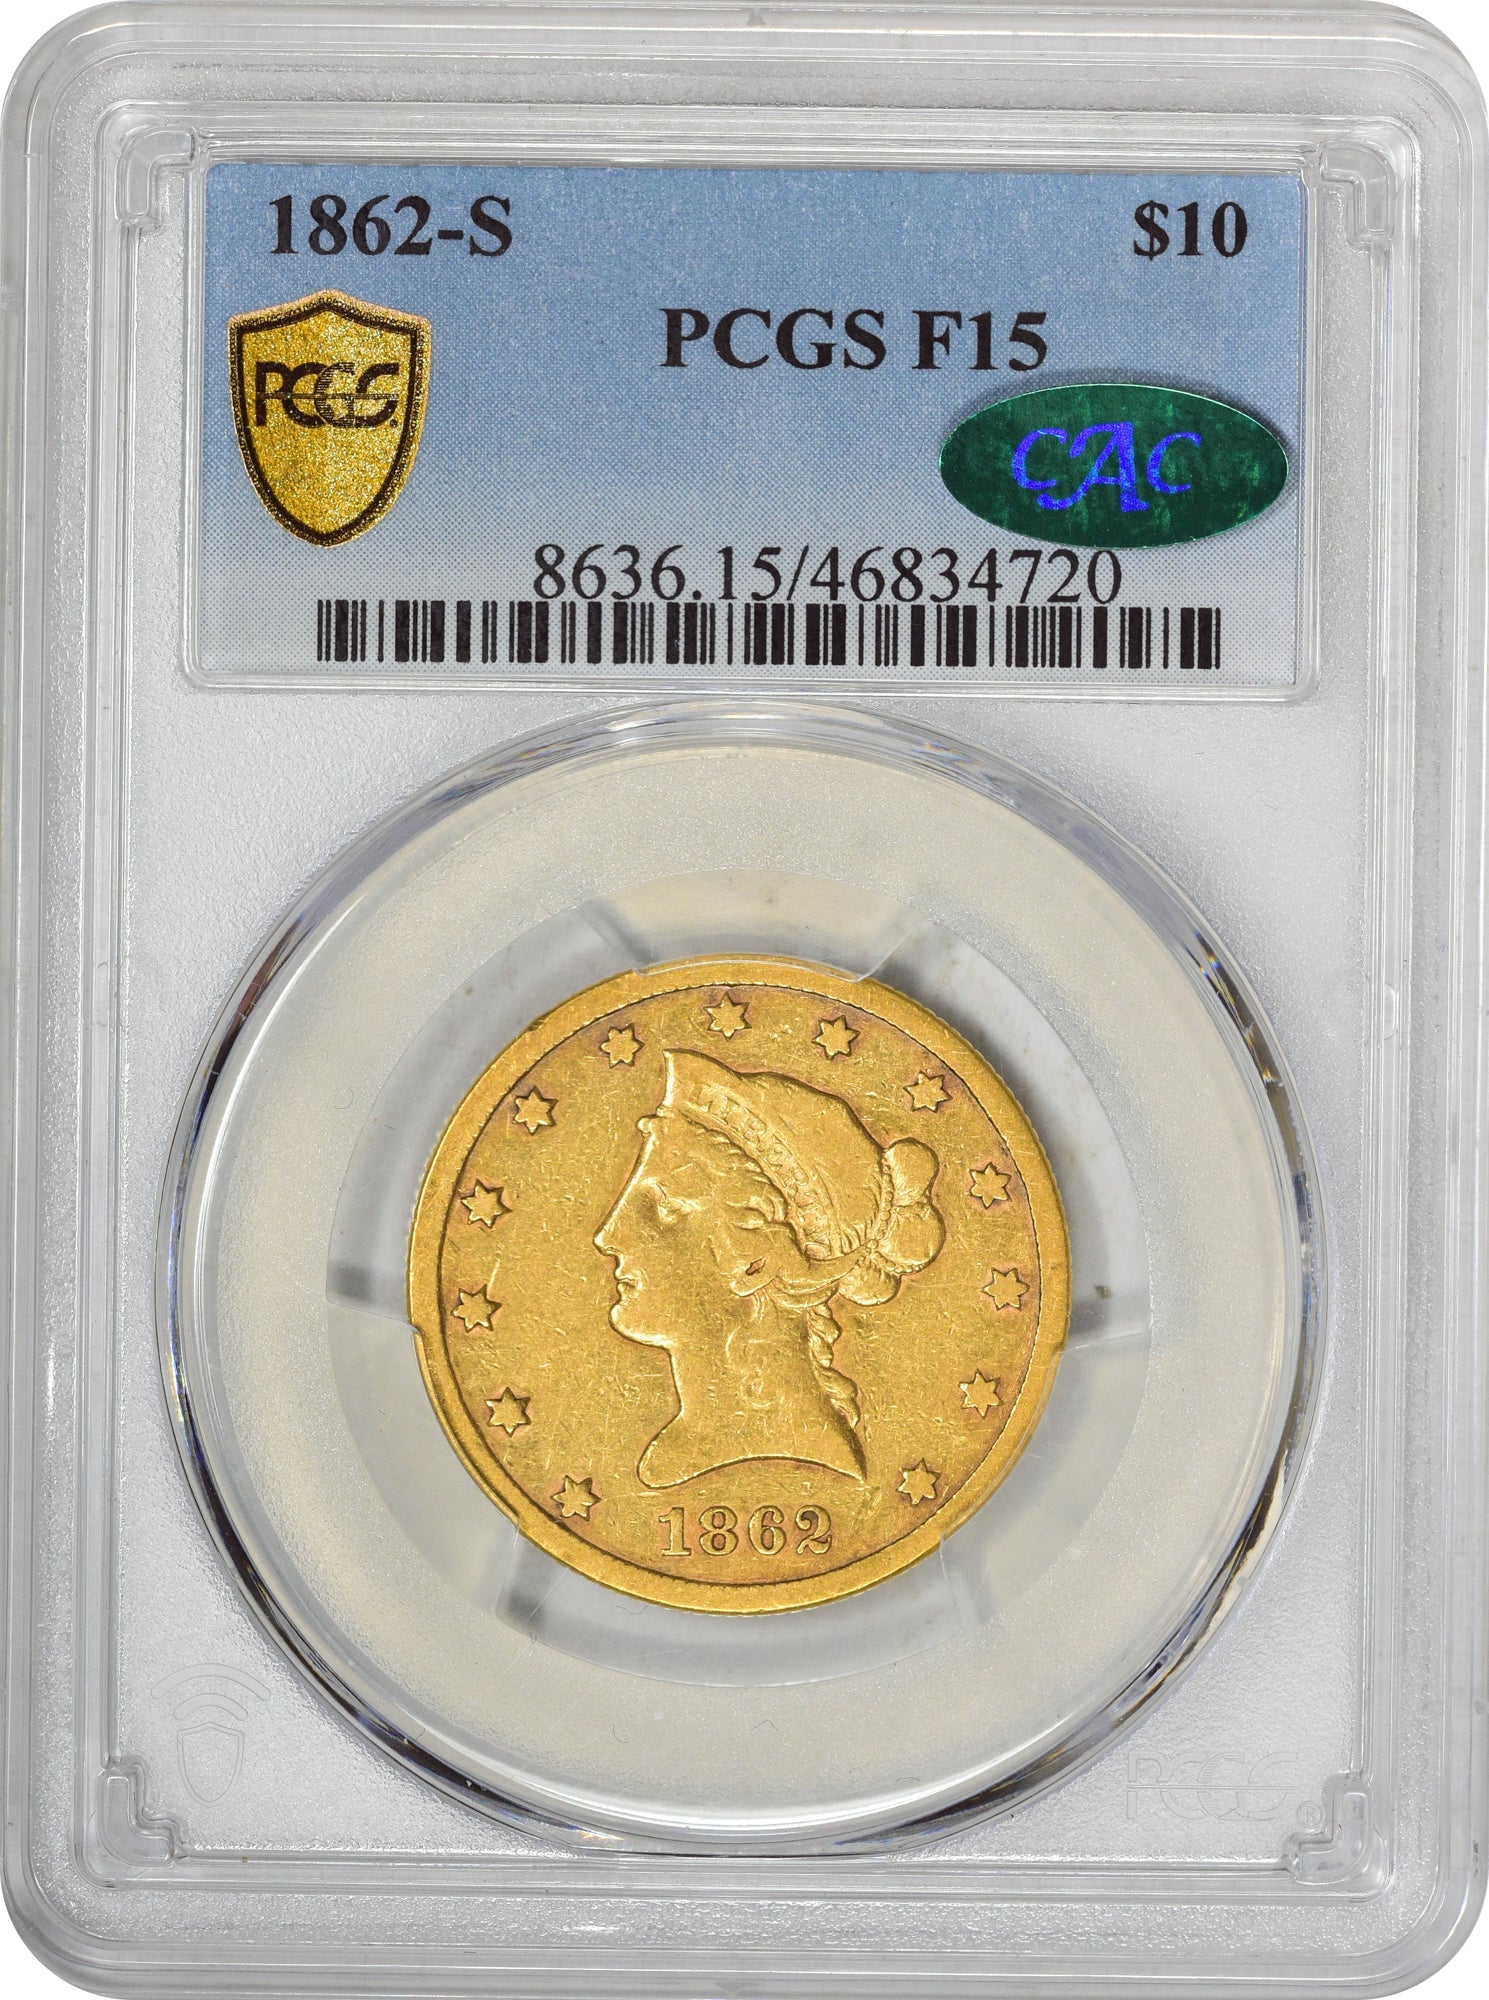 1862-S $10 F15 PCGS CAC - Paradime Coins US Coins For Sale